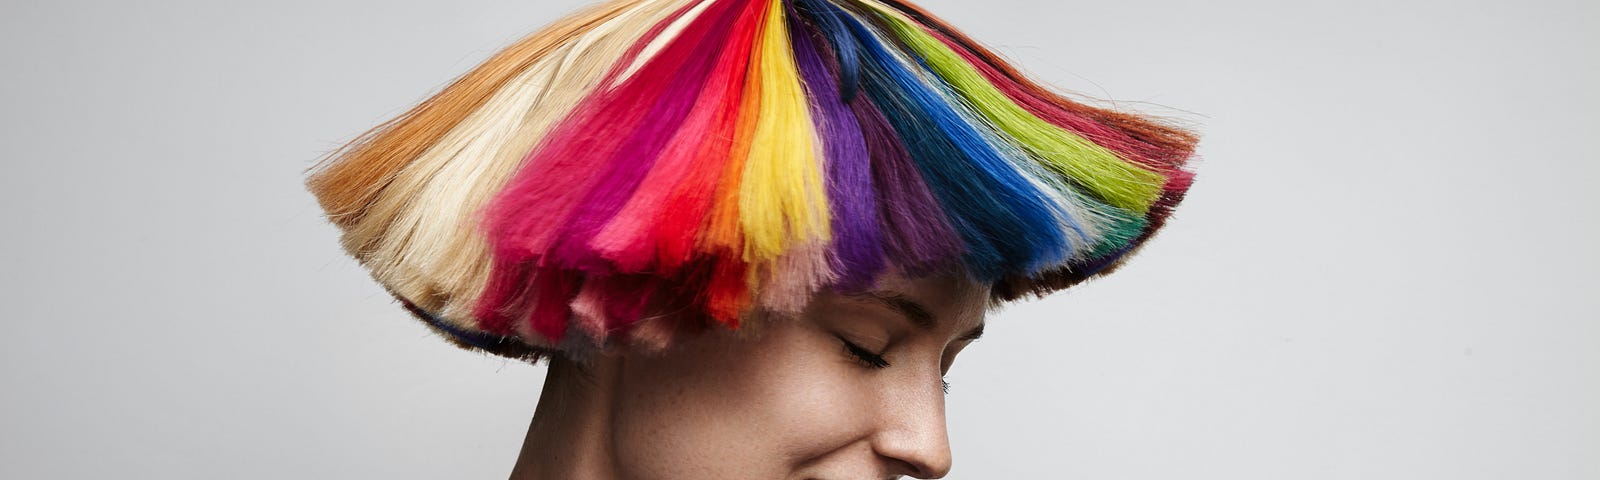 Pictured is a woman with rainbow colored hair